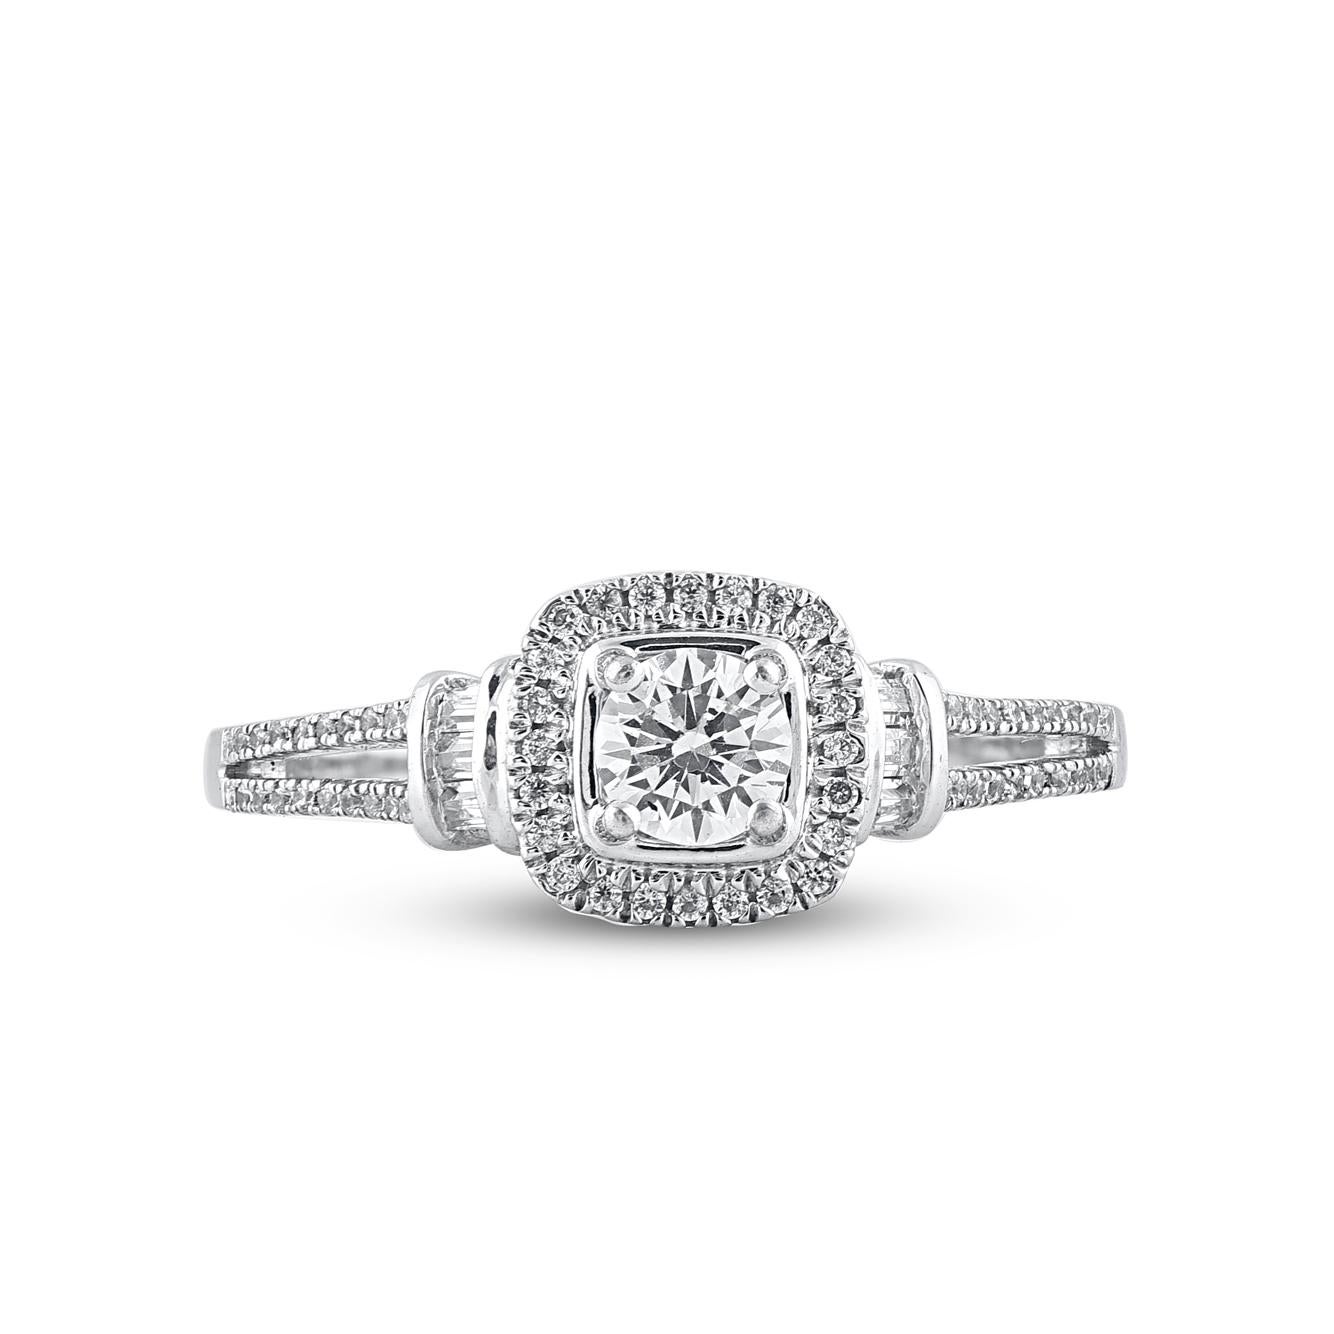 Express your love for her in the most classic way with this halo ring. This ring is expertly crafted in 14 Karat White Gold and features of this ring single cut, brilliant cut & baguette 73 diamond set in prong and channel setting. Total diamond